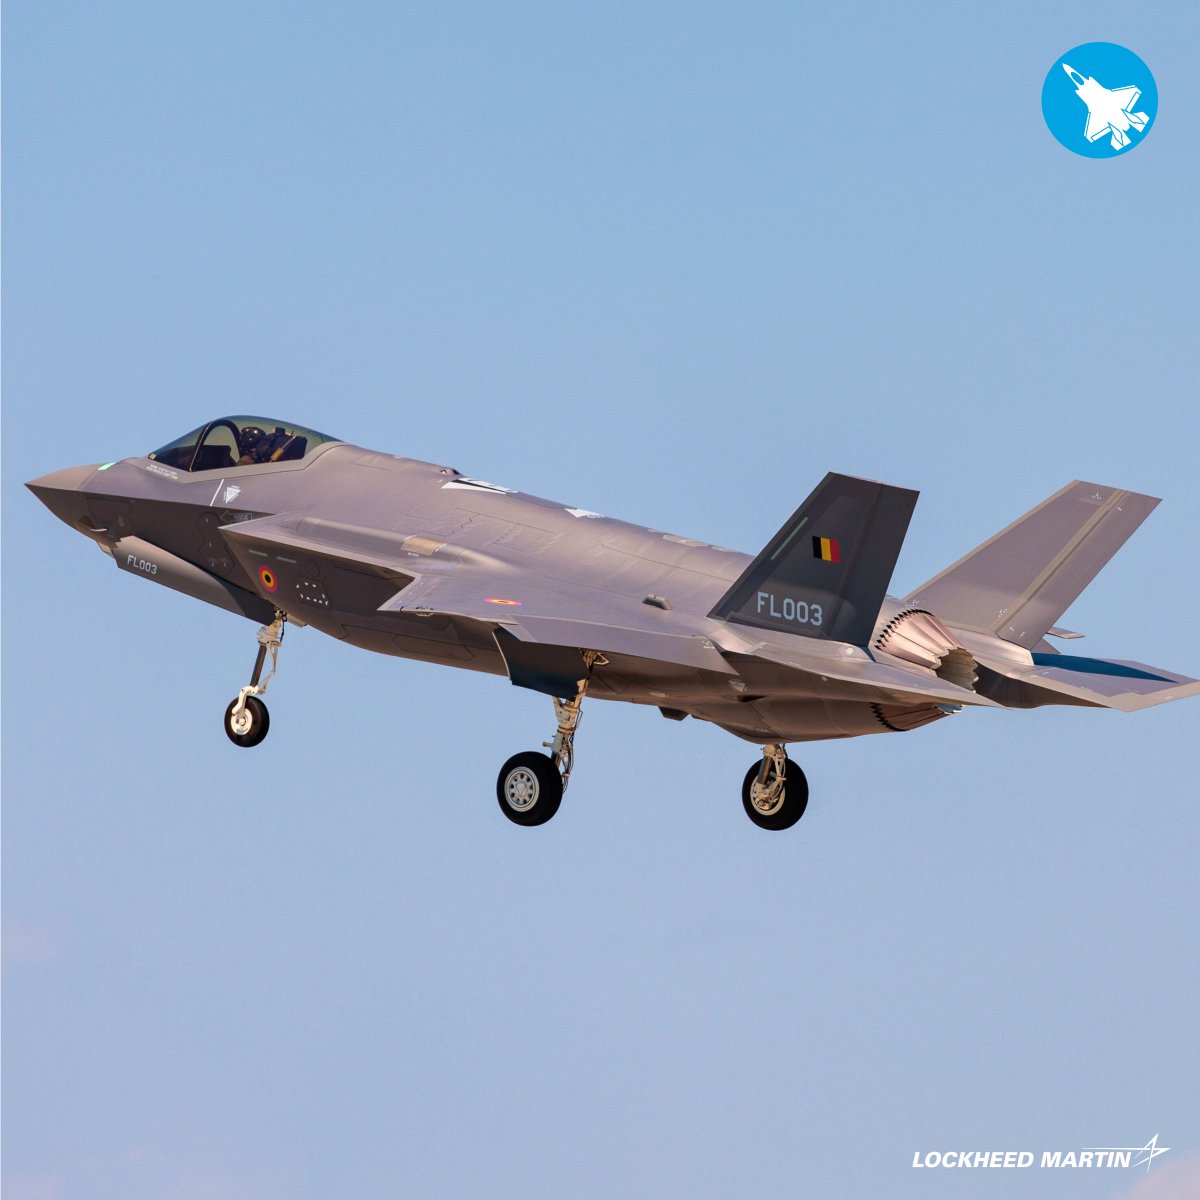 Wheels up for #FighterFriday ⚡ This week, a Belgian F-35 took flight for the first time.